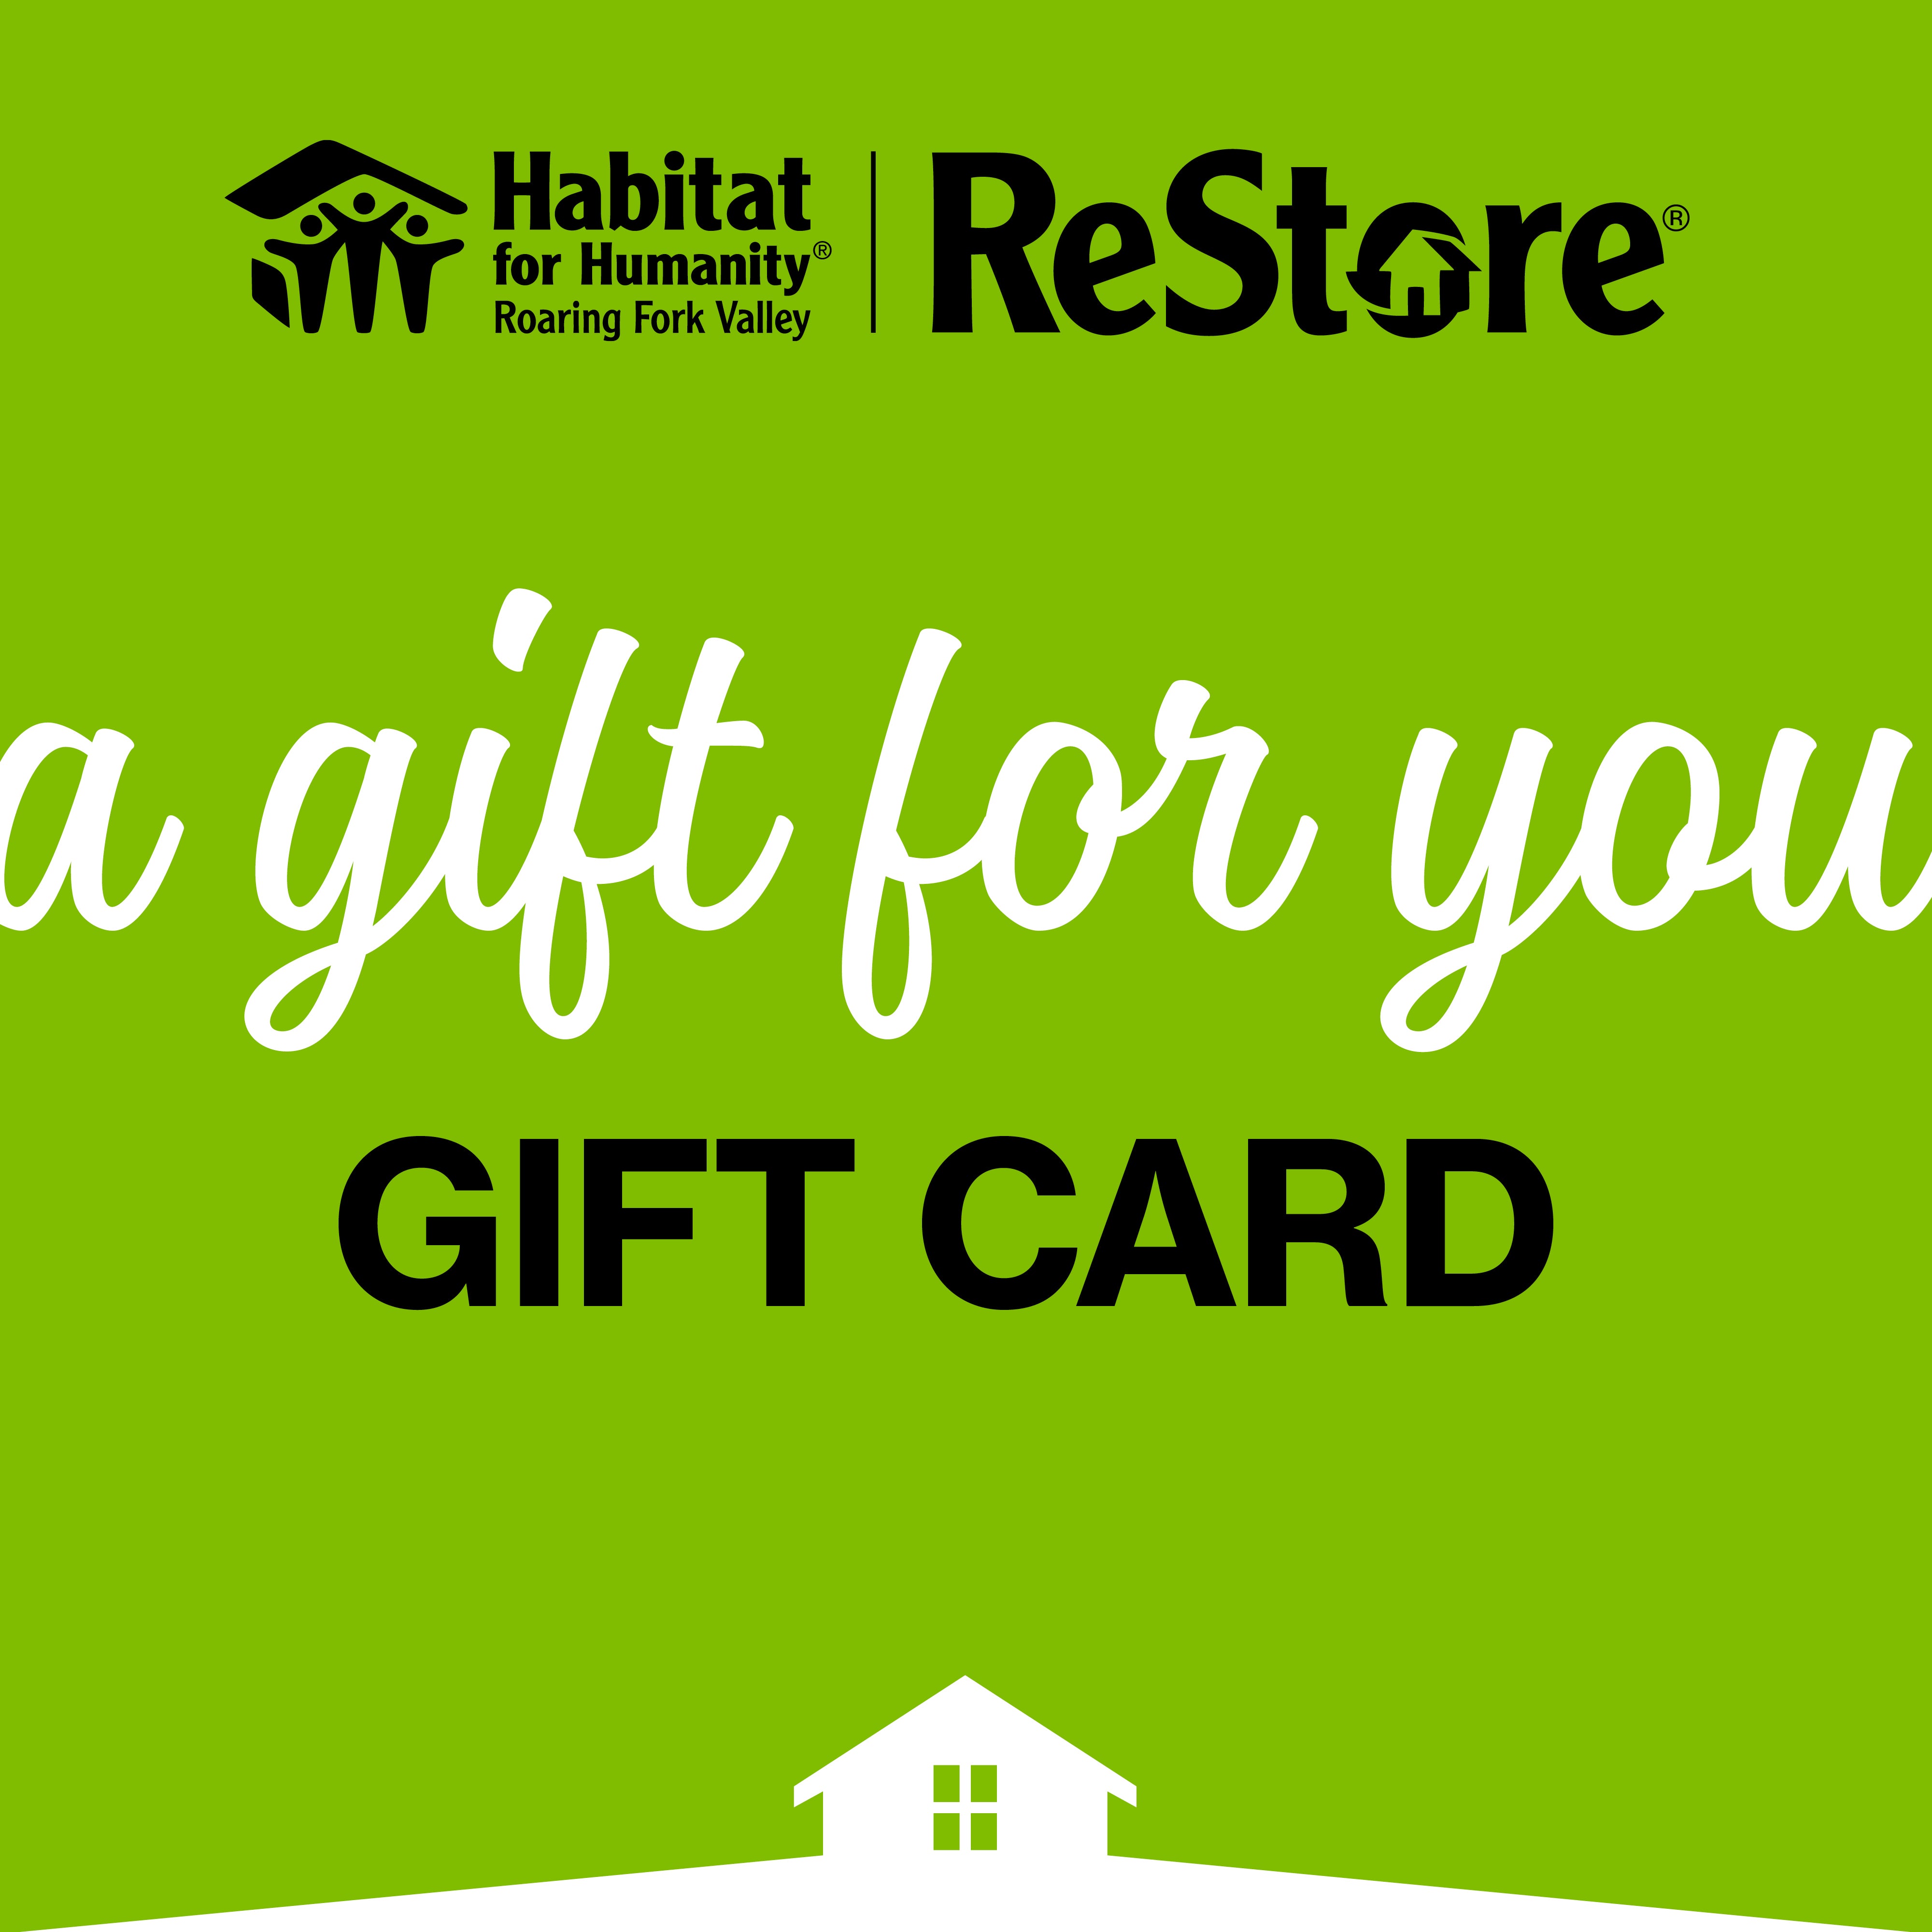 ReStore of the Roaring Fork Valley Gift Card